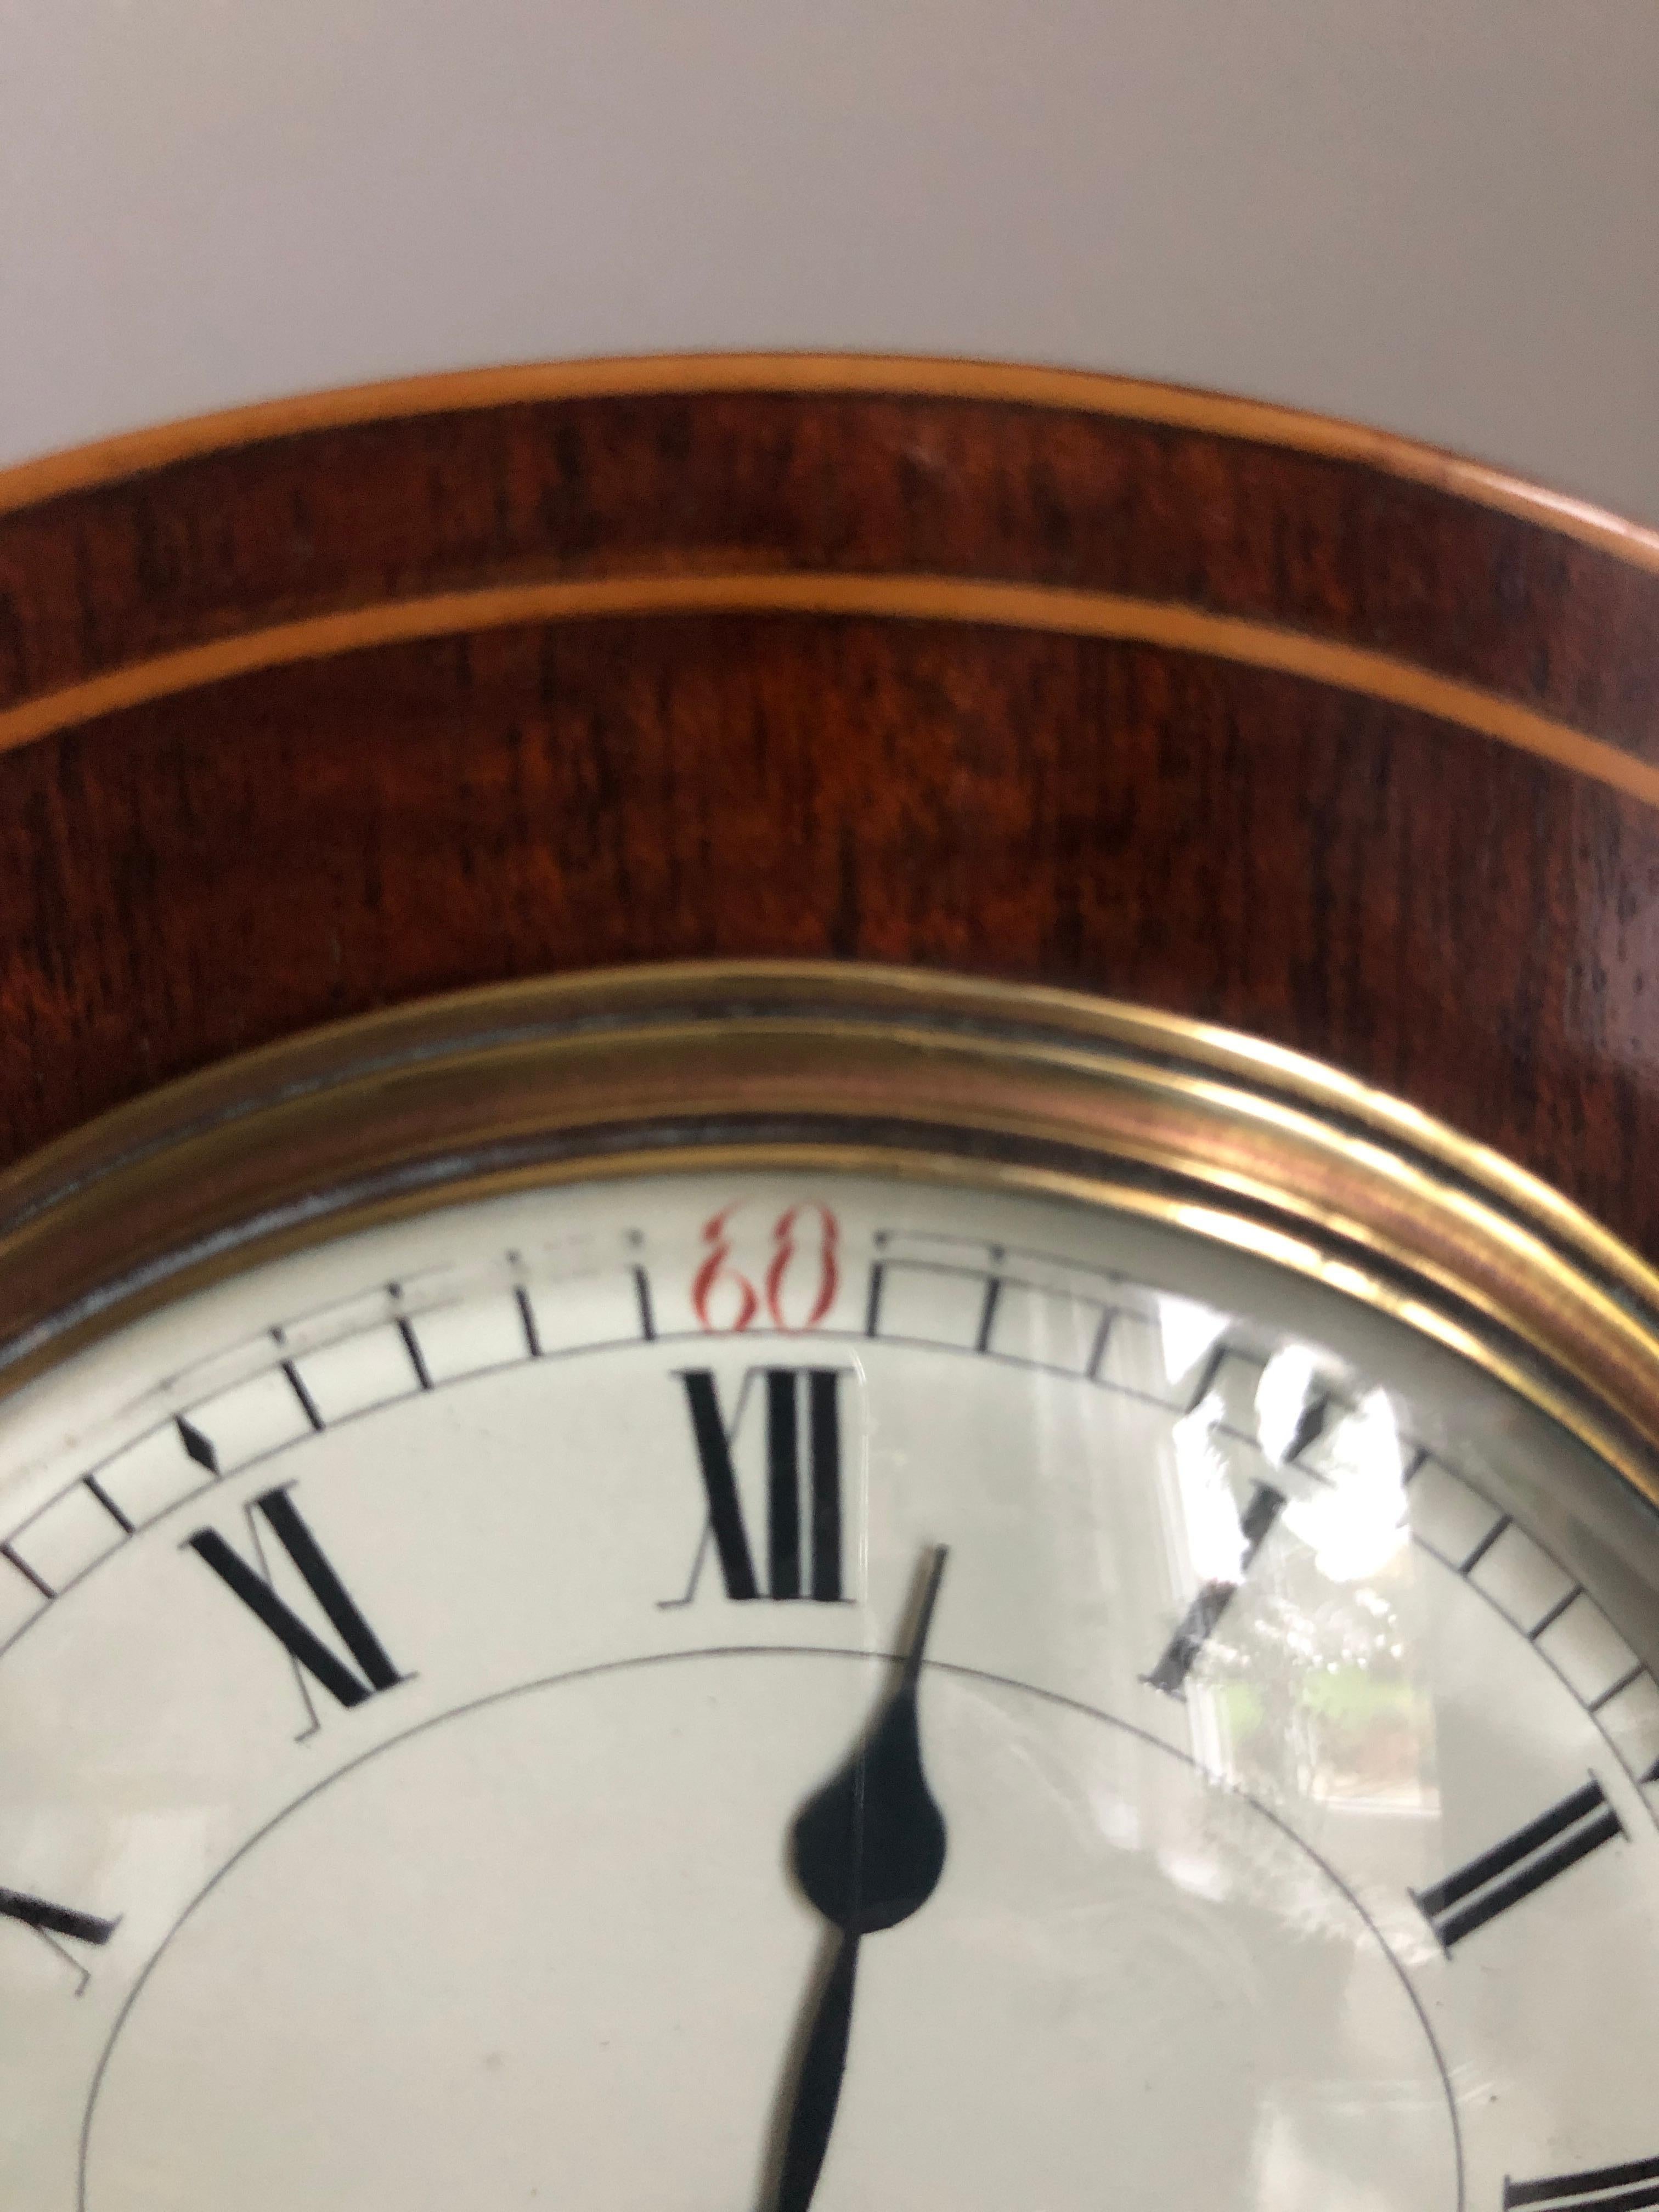 Fine antique Edwardian inlaid mahogany desk clock having a magnificent inlaid balloon shaped marquetry case with original brass ball feet. An elegant enameled dial with original hands with an 8 day movement. It is in good working order and comes